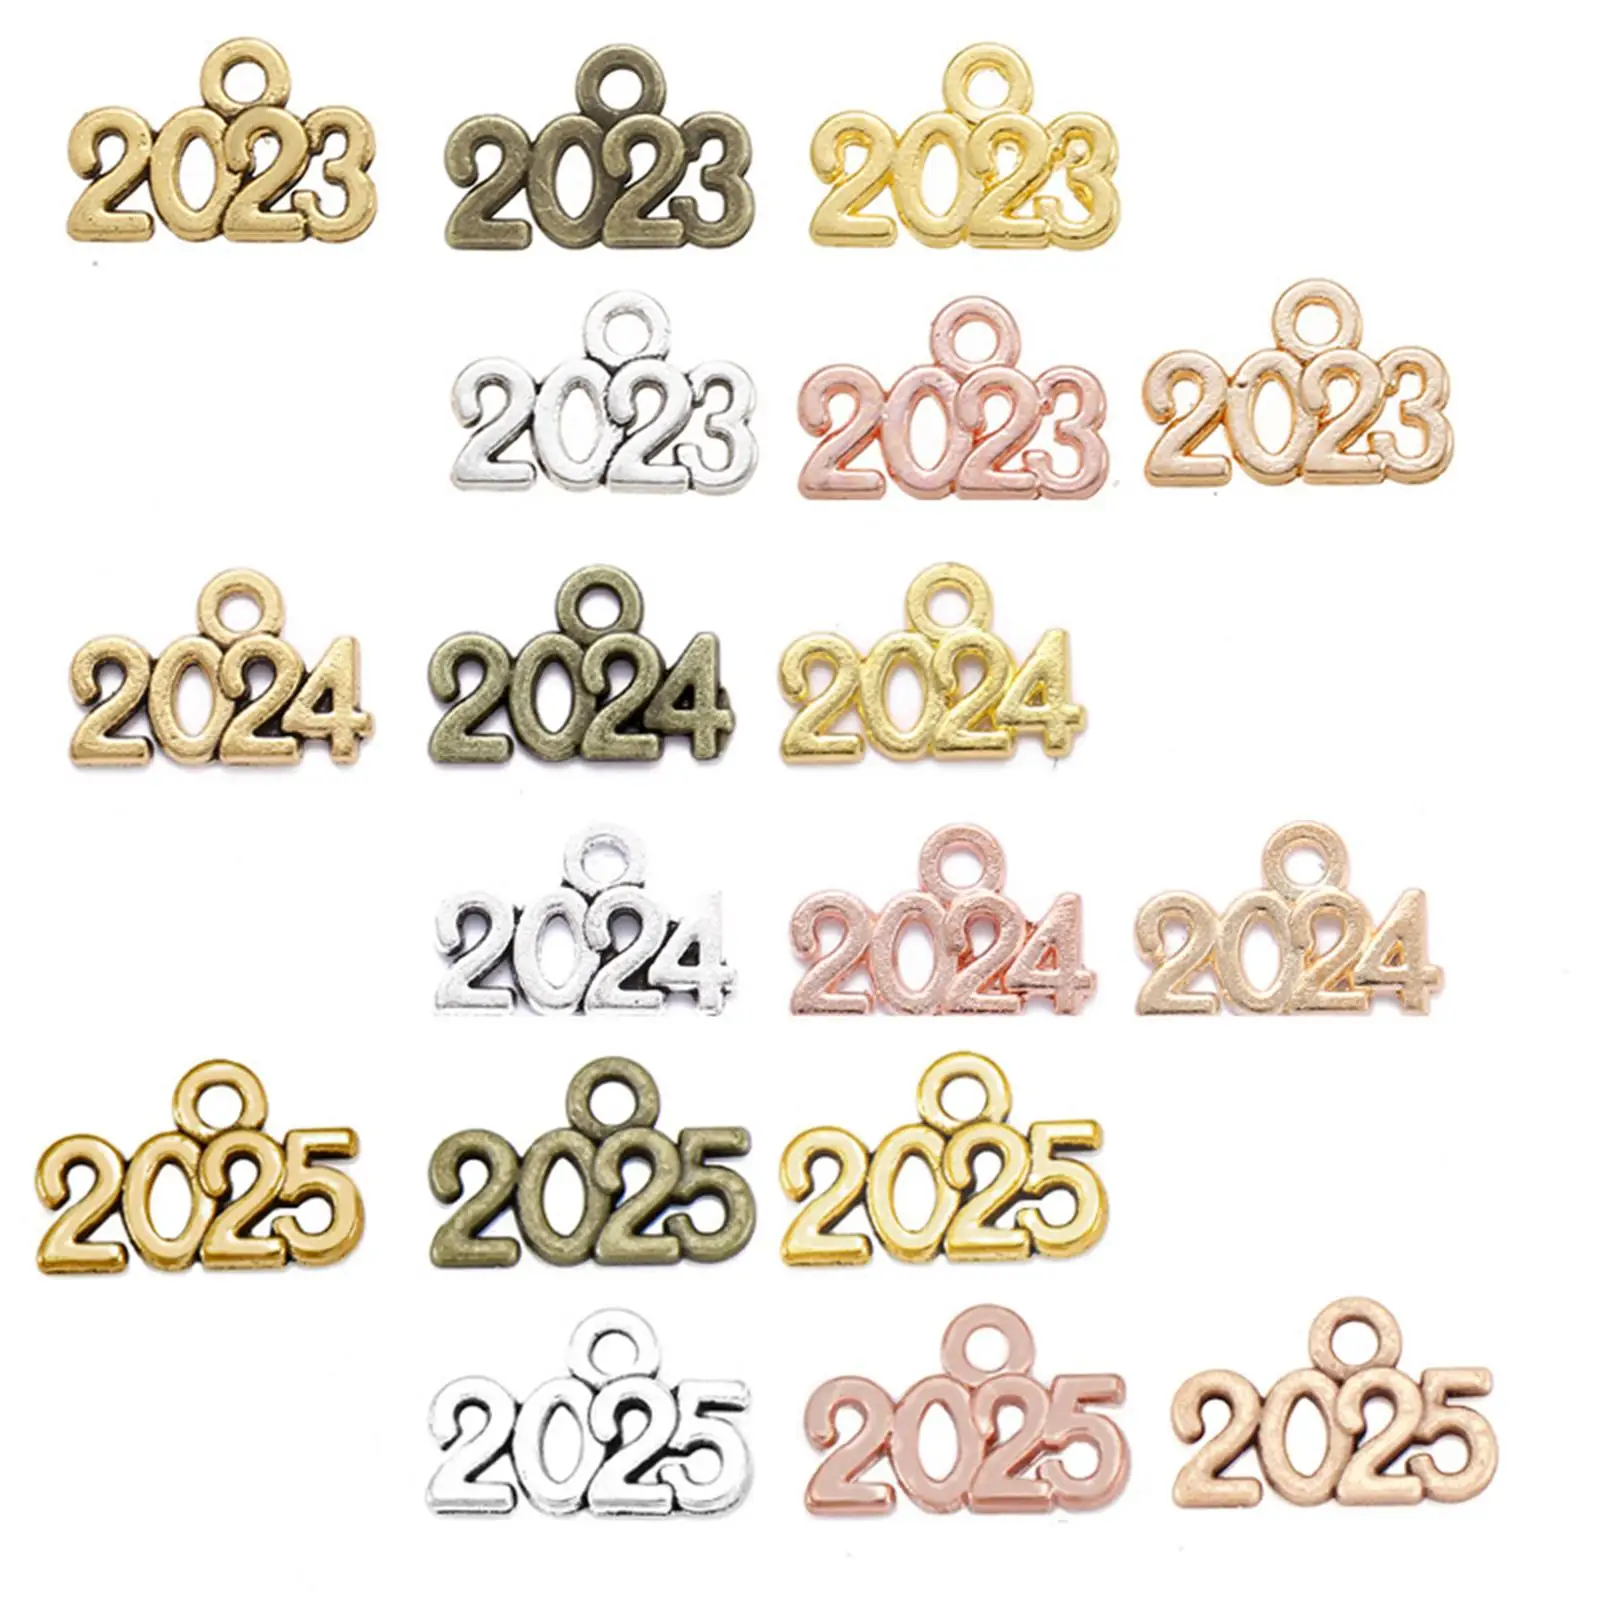 100x 2024 Year Number Charm Jewelry Findings Making Bracelets Craft Accessories DIY Project Earring Graduation Charms Pendants